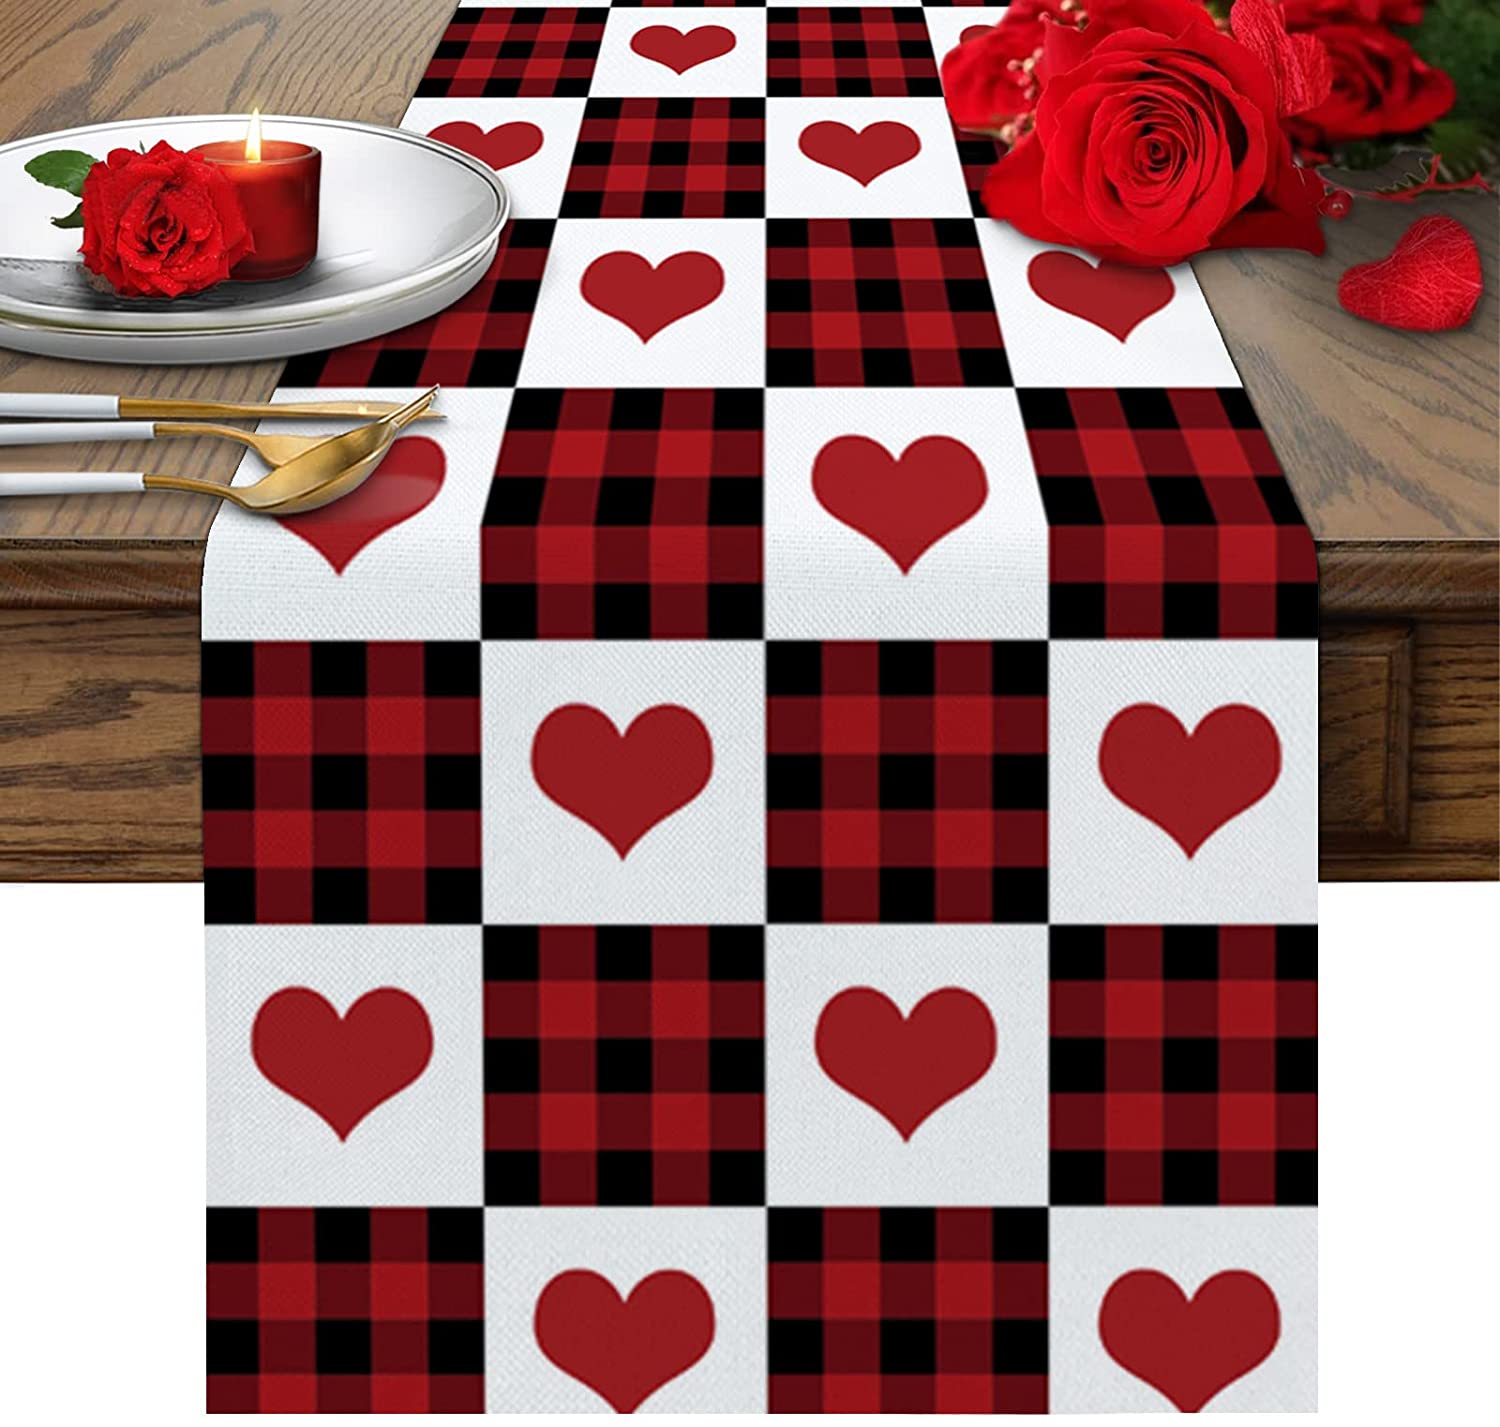 Red and Black Lattice - Love Heart Table Runner For Valentine's Day